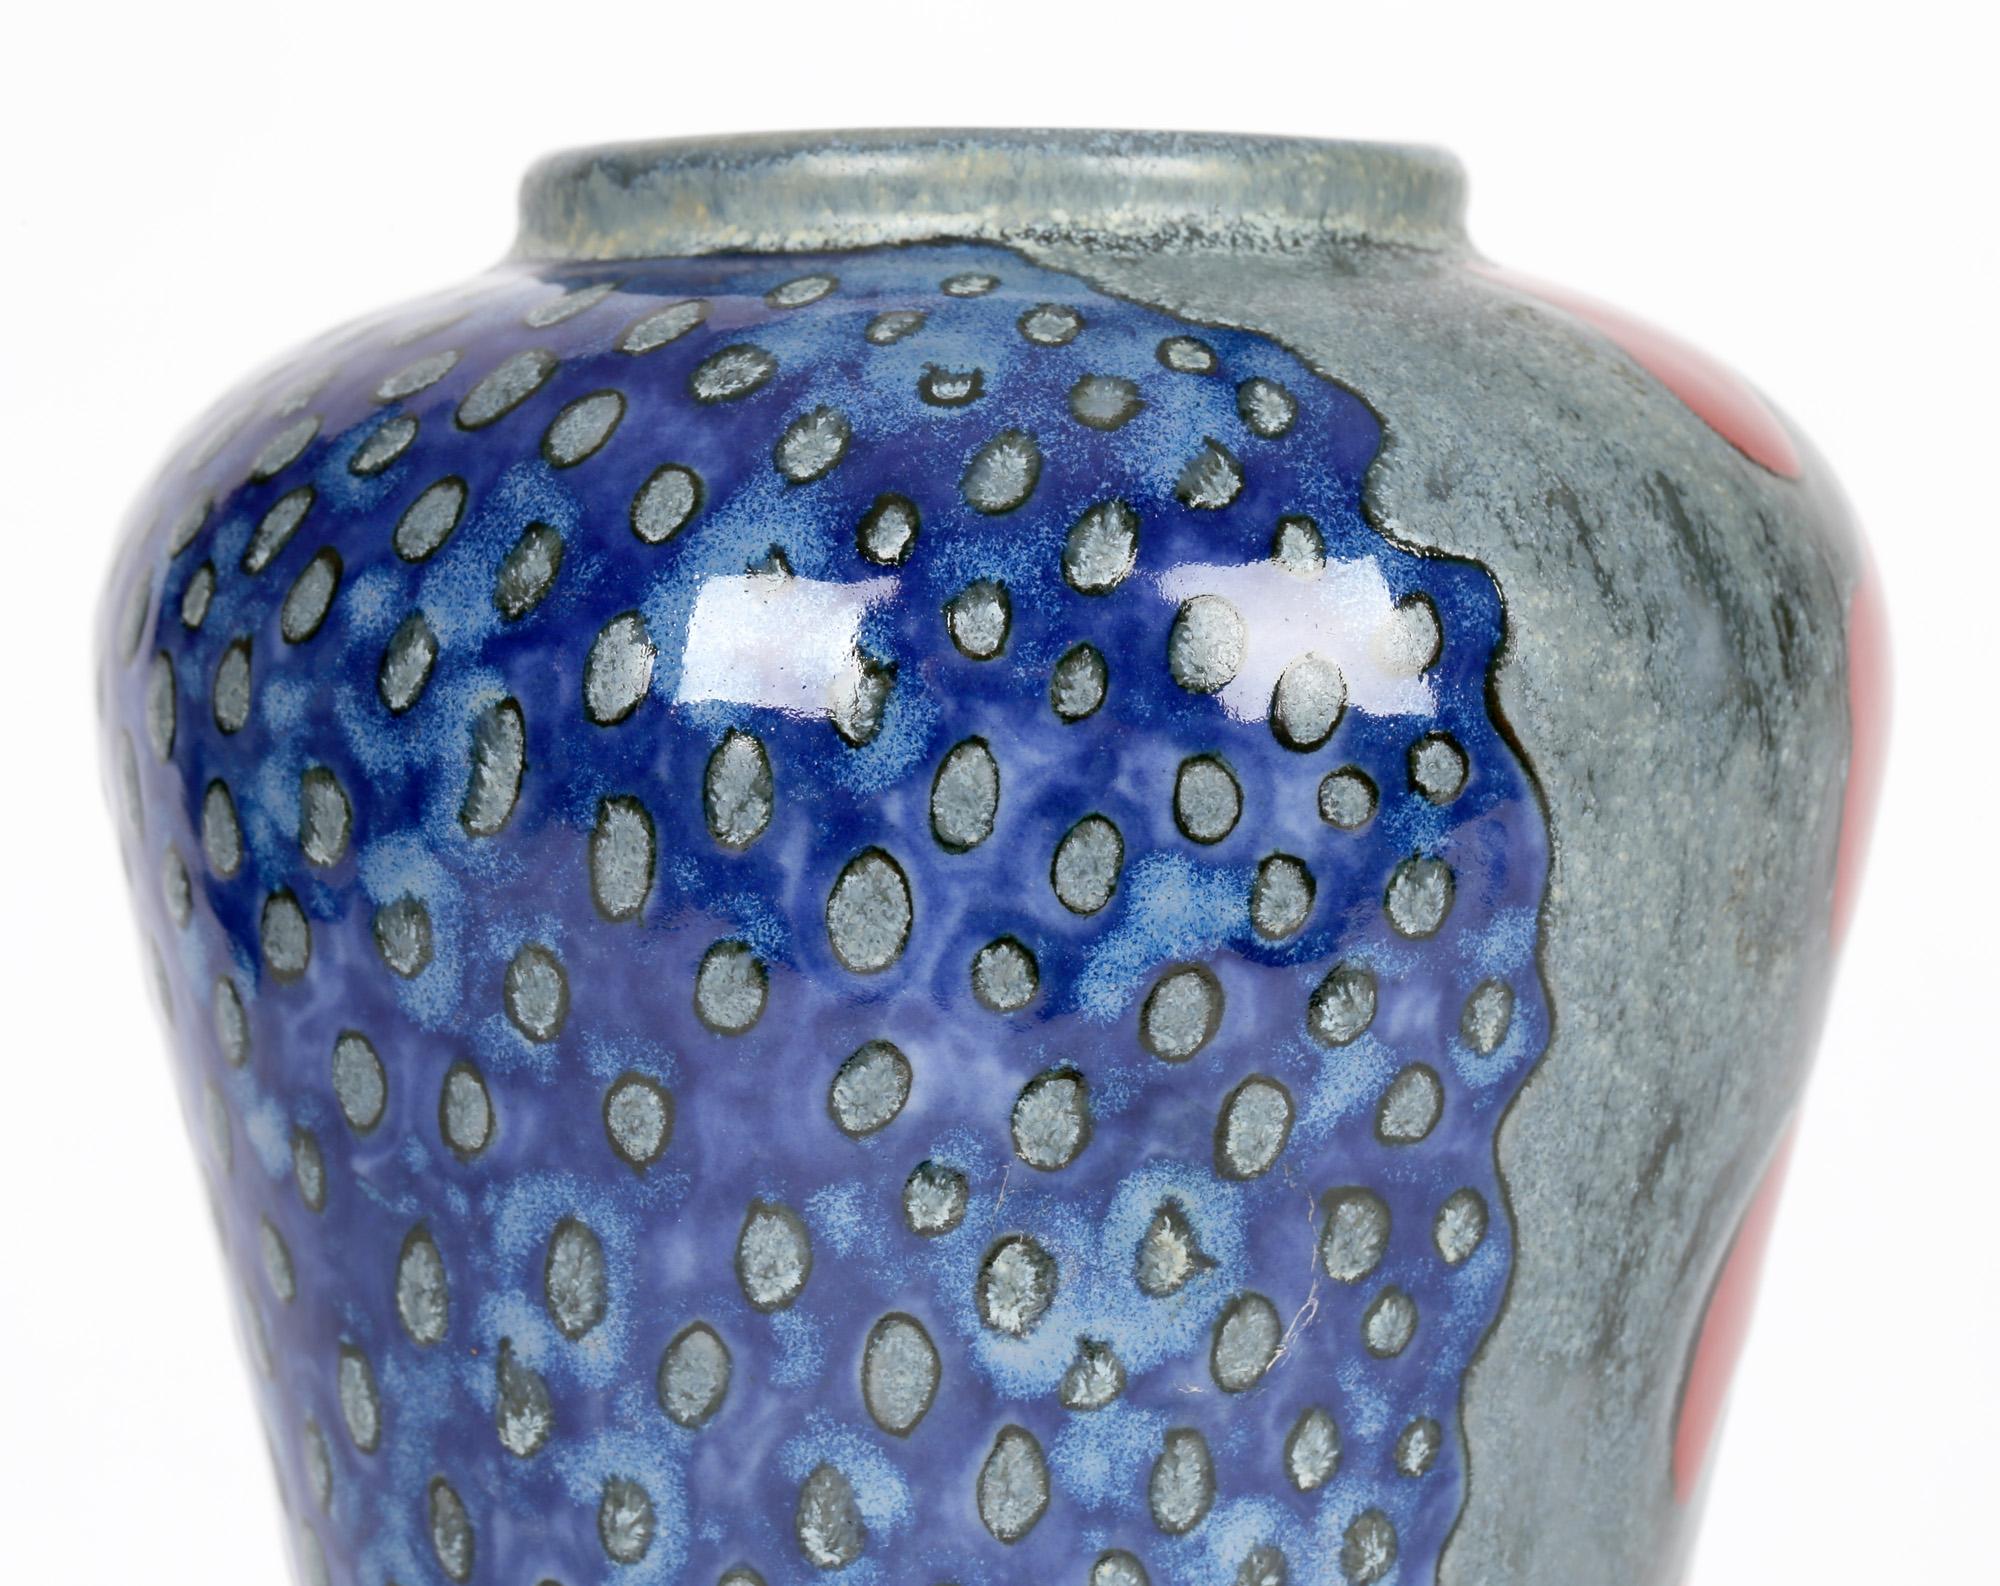 A striking Cobridge stoneware art pottery vase decorated with abstract designs, signed to base and dated 24th August 1999. The vase is of tall elegant shape standing on a skirted rounded base with a narrow lower body widening towards the top with a